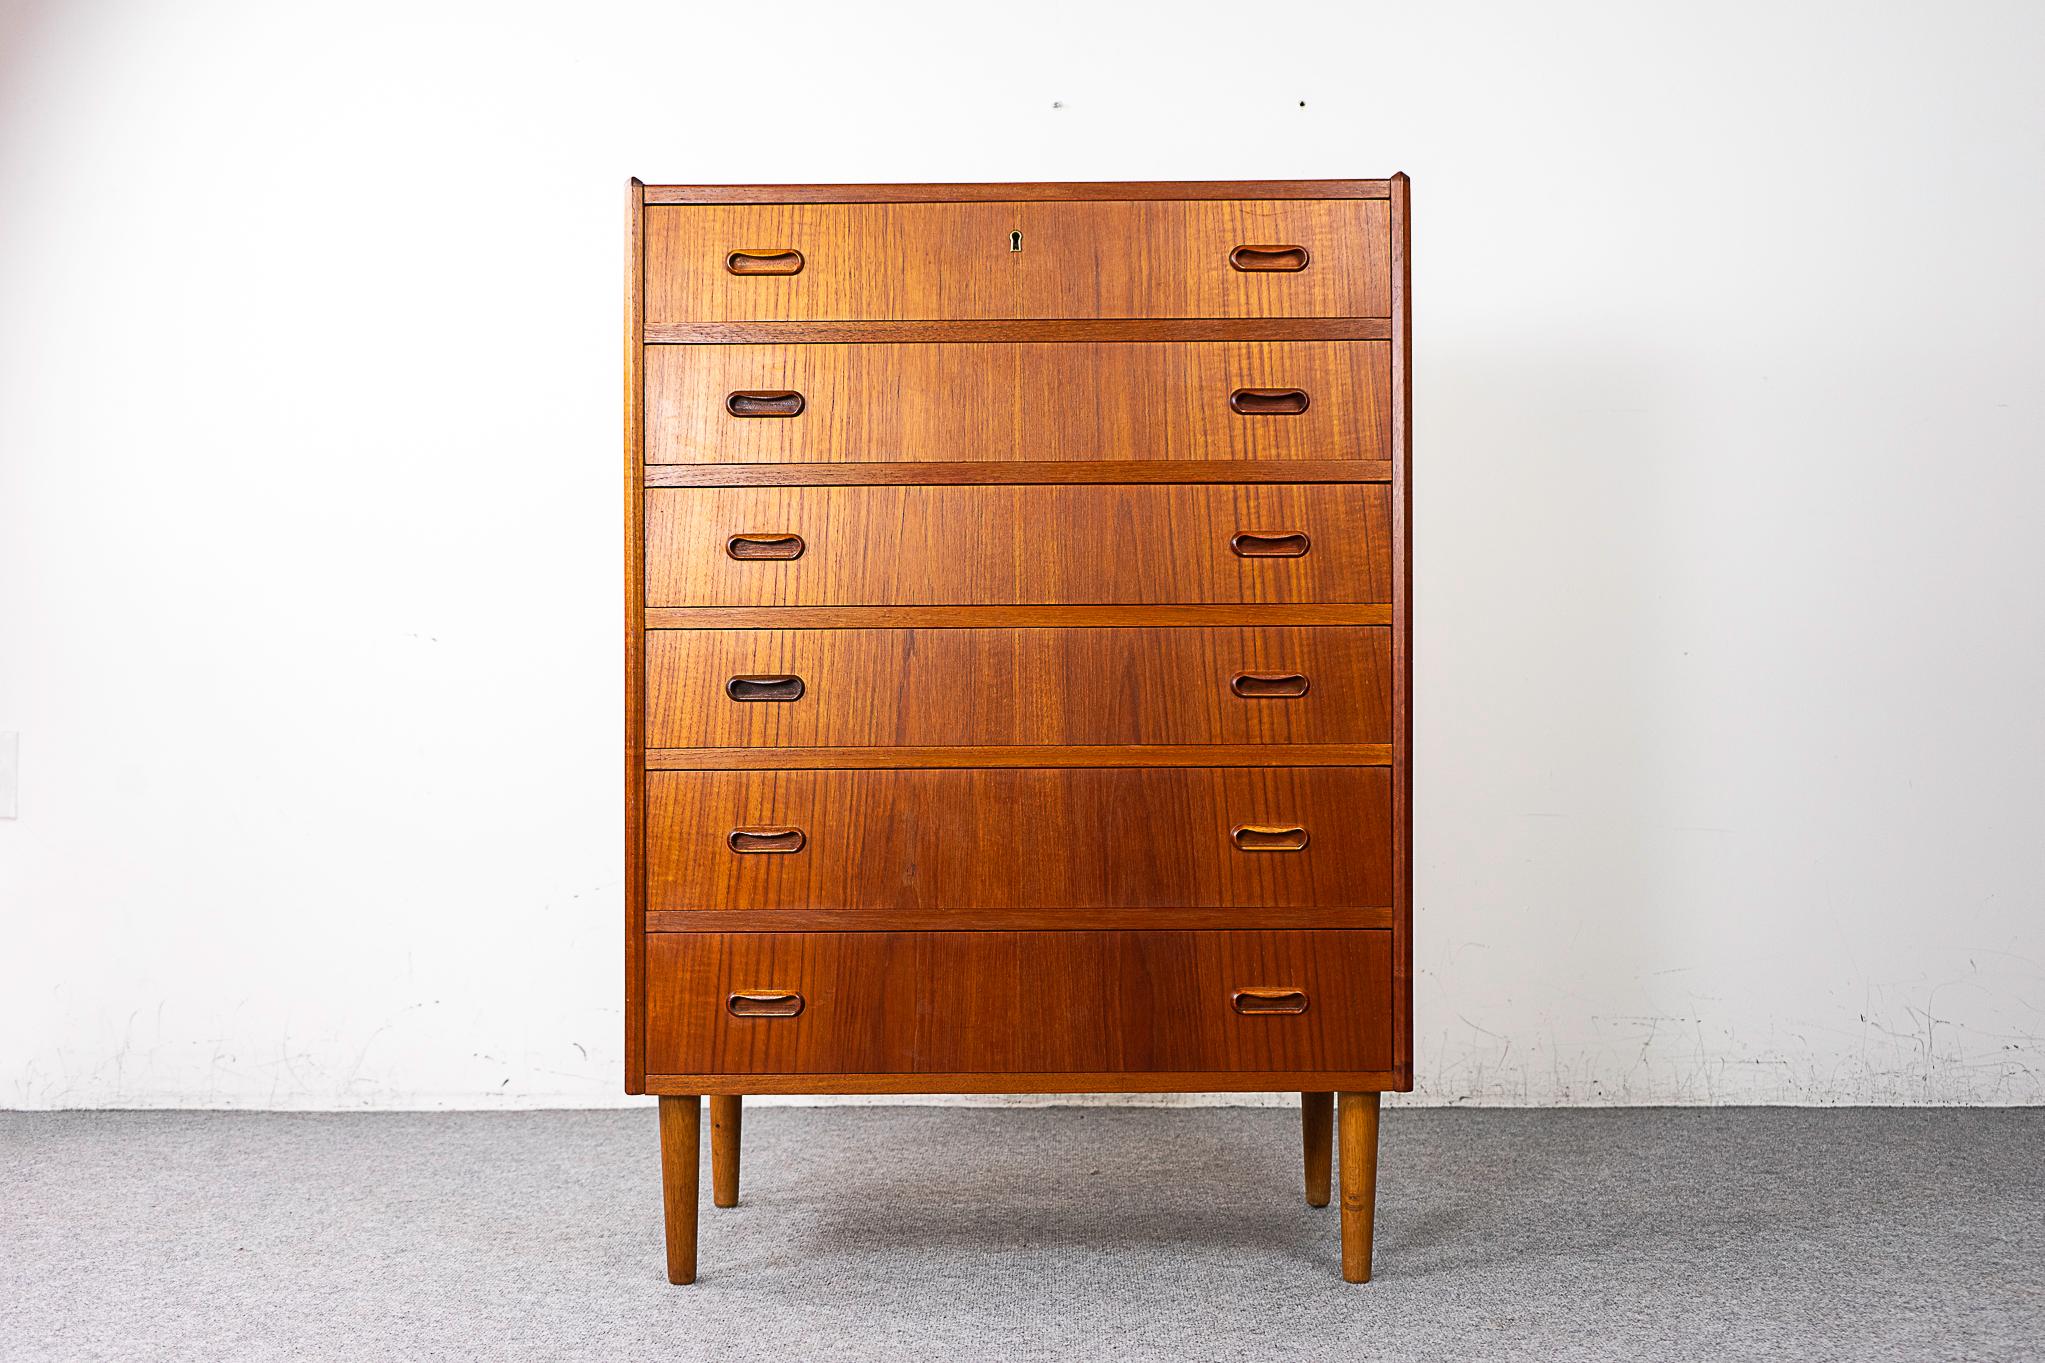 Teak mid-century dresser, circa 1960's. Solid wood edging and stunning book-matched veneer on top and drawer faces. Dovetail construction, cute handles and tapering, elegant legs.

Please inquire for remote and international shipping rates.